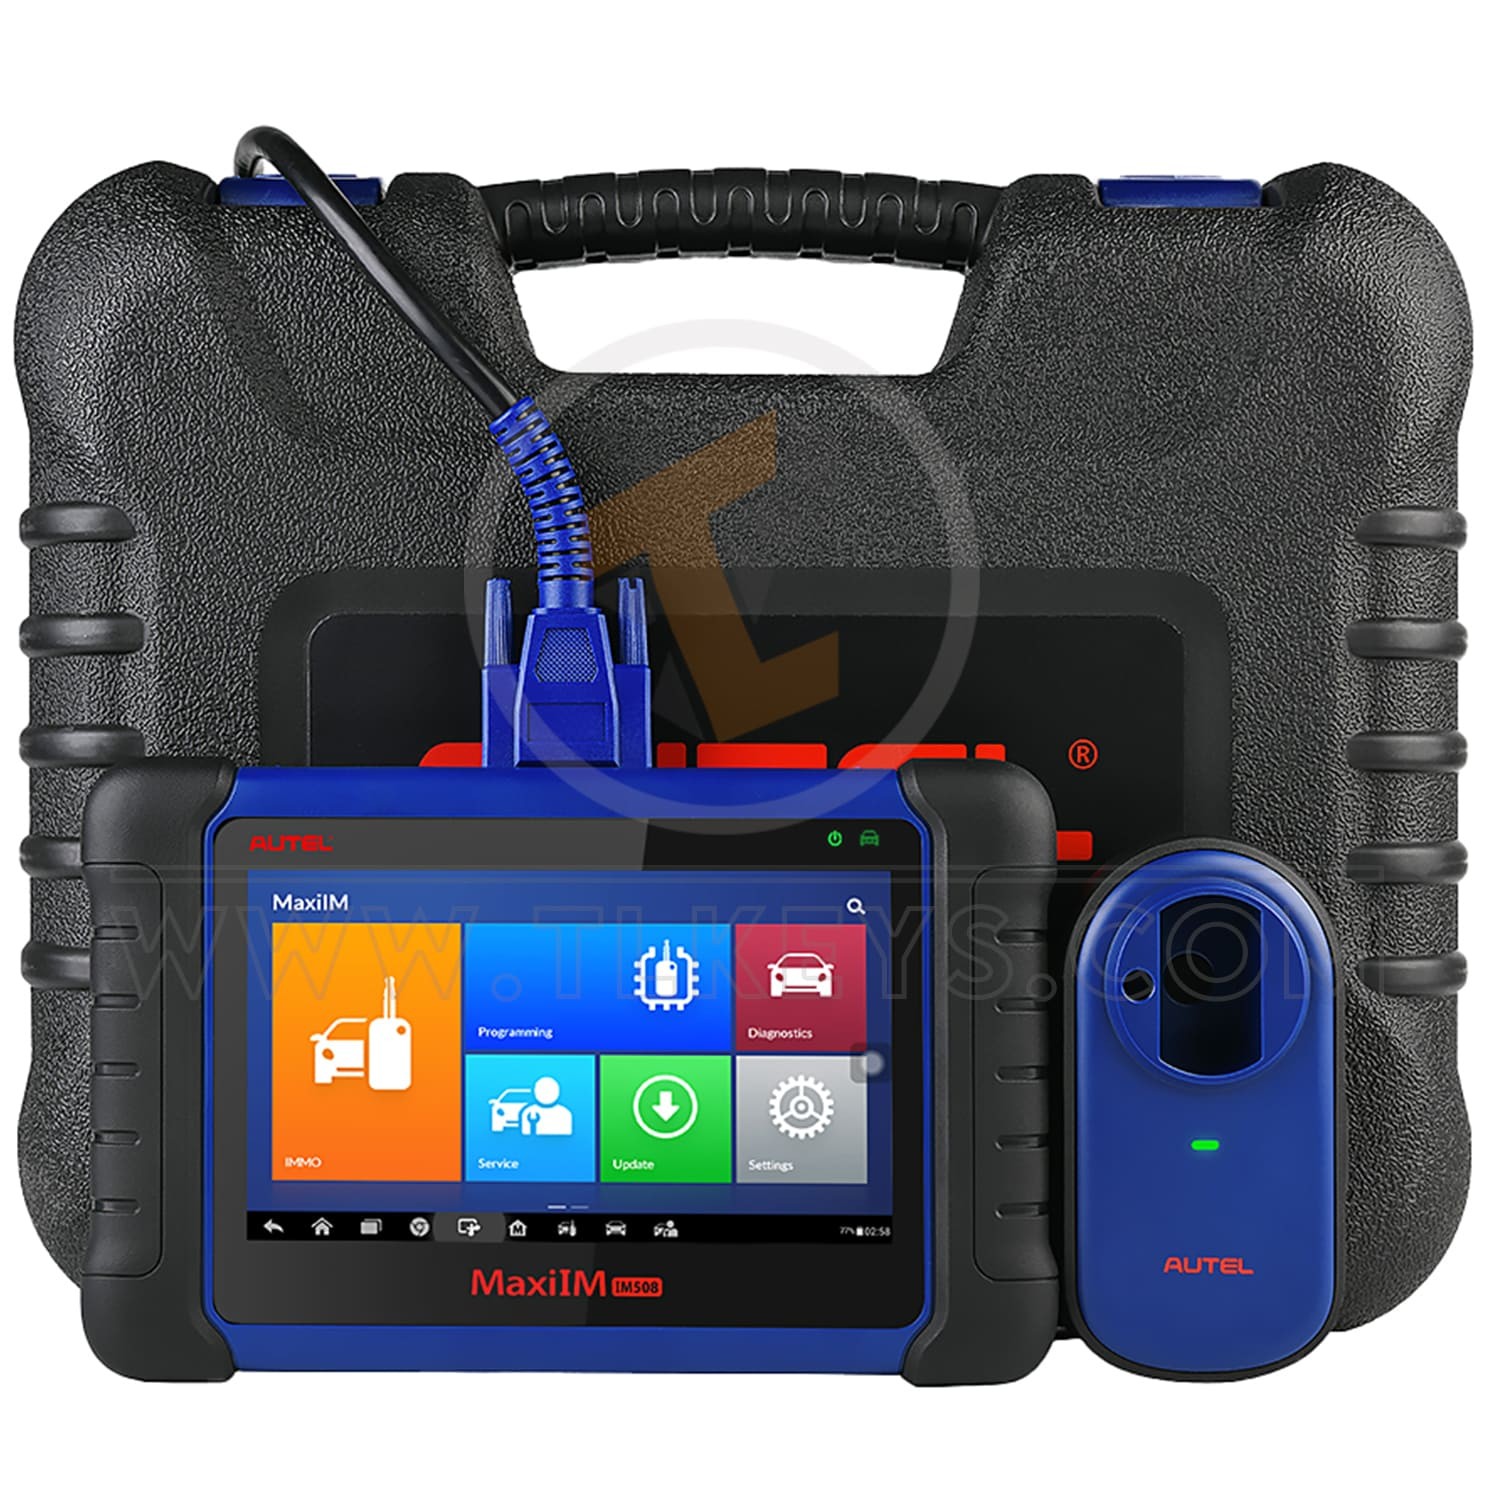 Autel IM508S with XP400 PRO & Xhorse Dolphin 2 XP-005L - Key Cutting and  Programming Bundle (Autel USA)